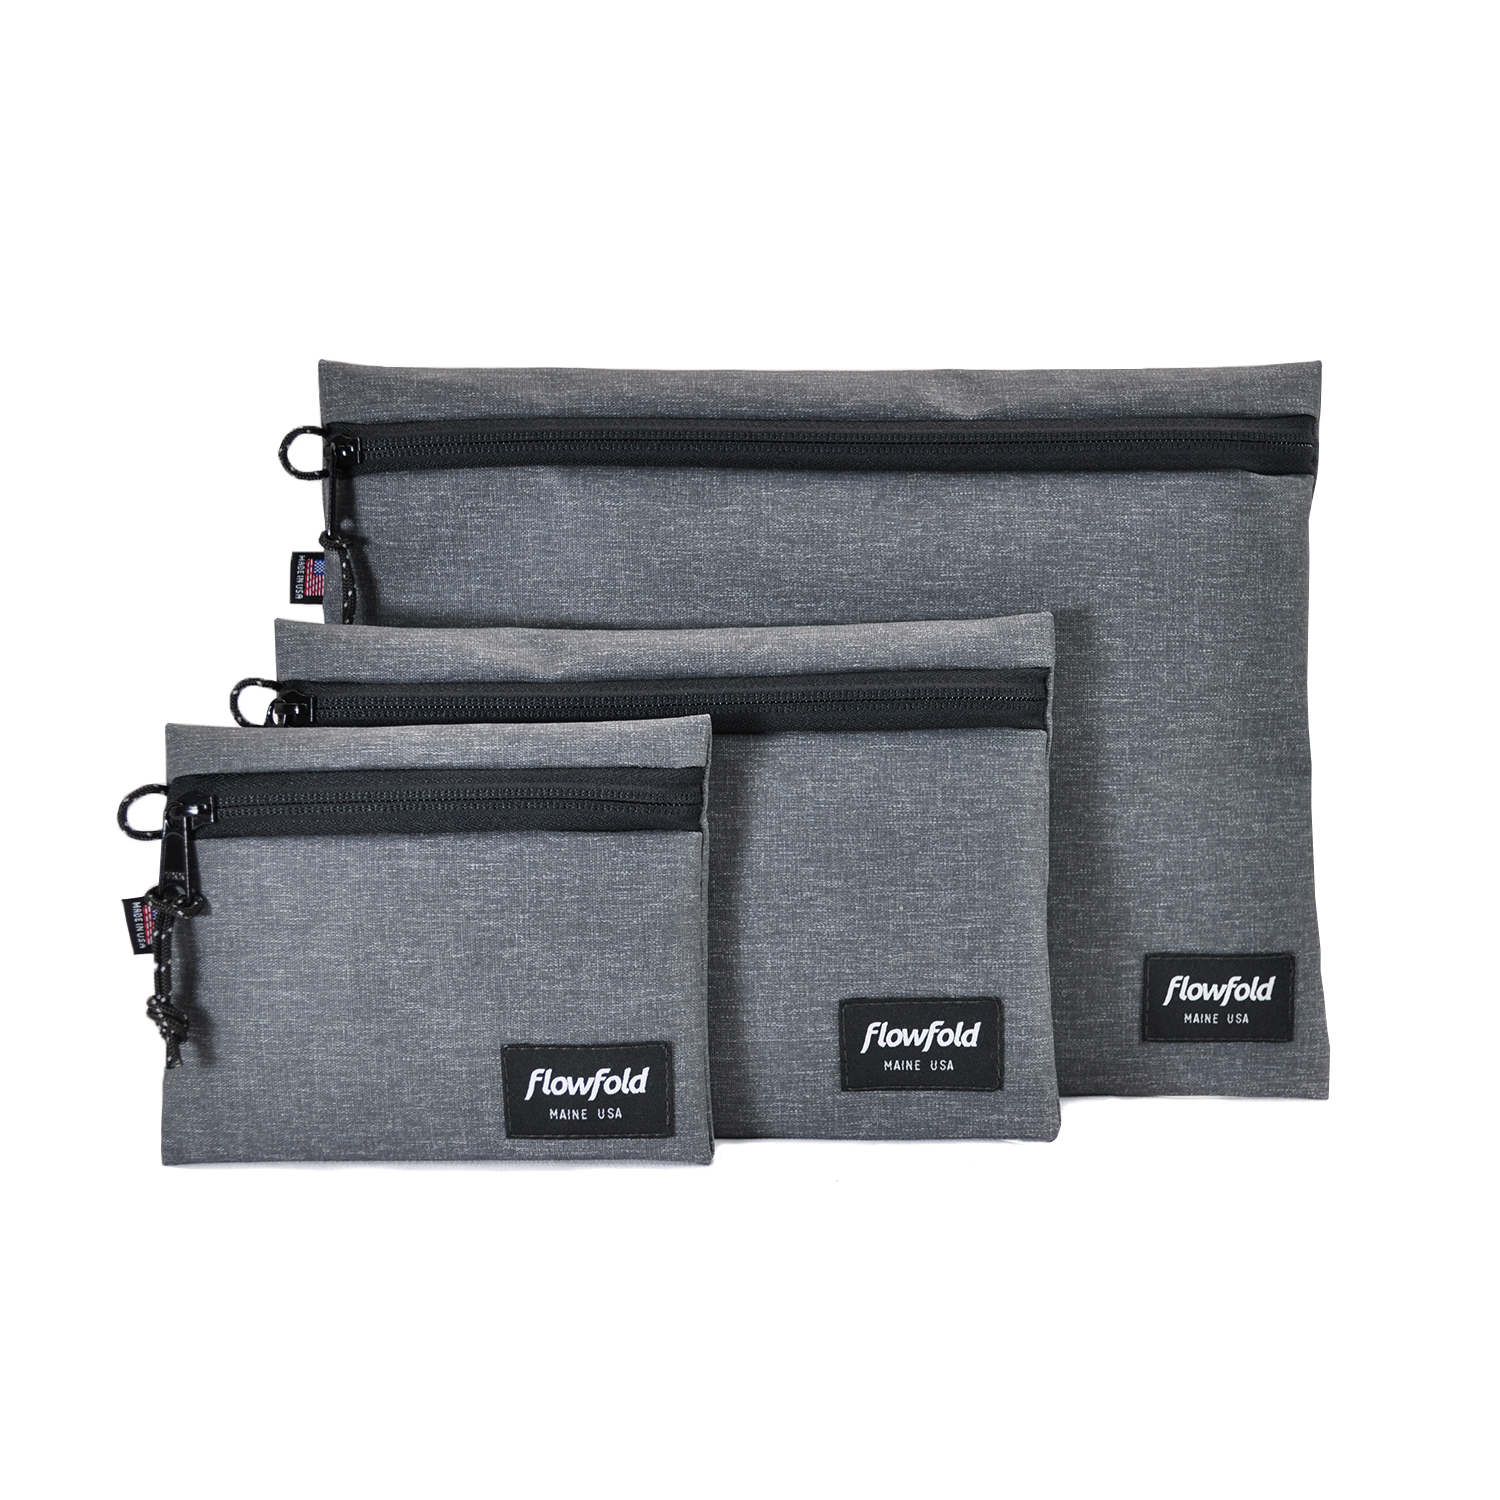 Flowfold Recycled Heather Grey Voyager Travel Pouches Set of Three Water Resistant Organization Pouches Made in USA